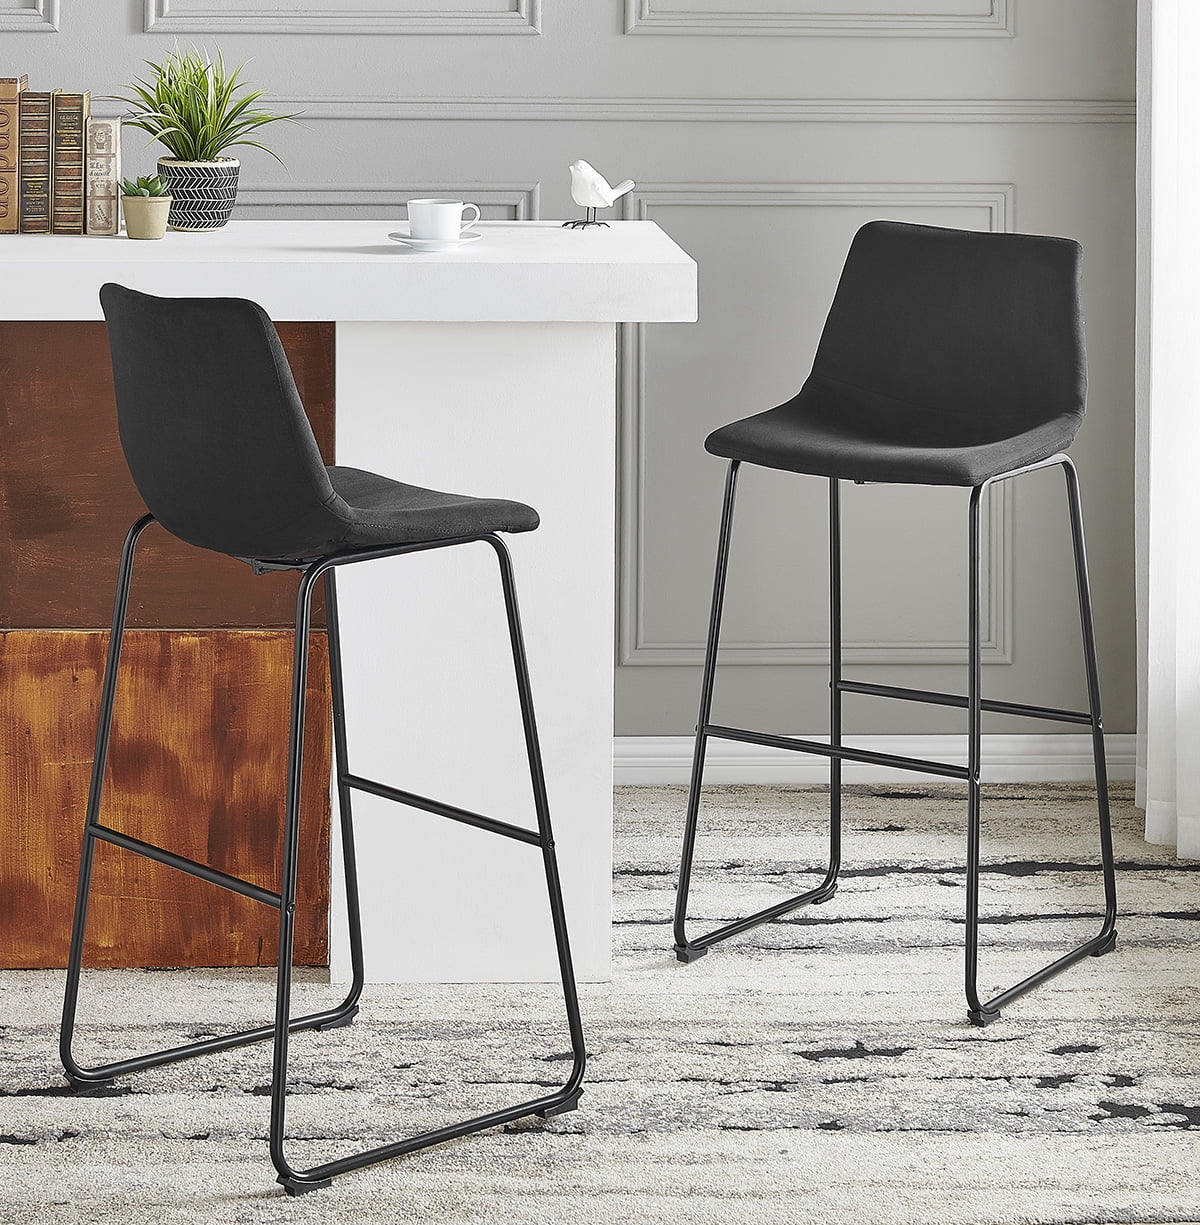 Stylish Bar Stools With Backrests For Comfort